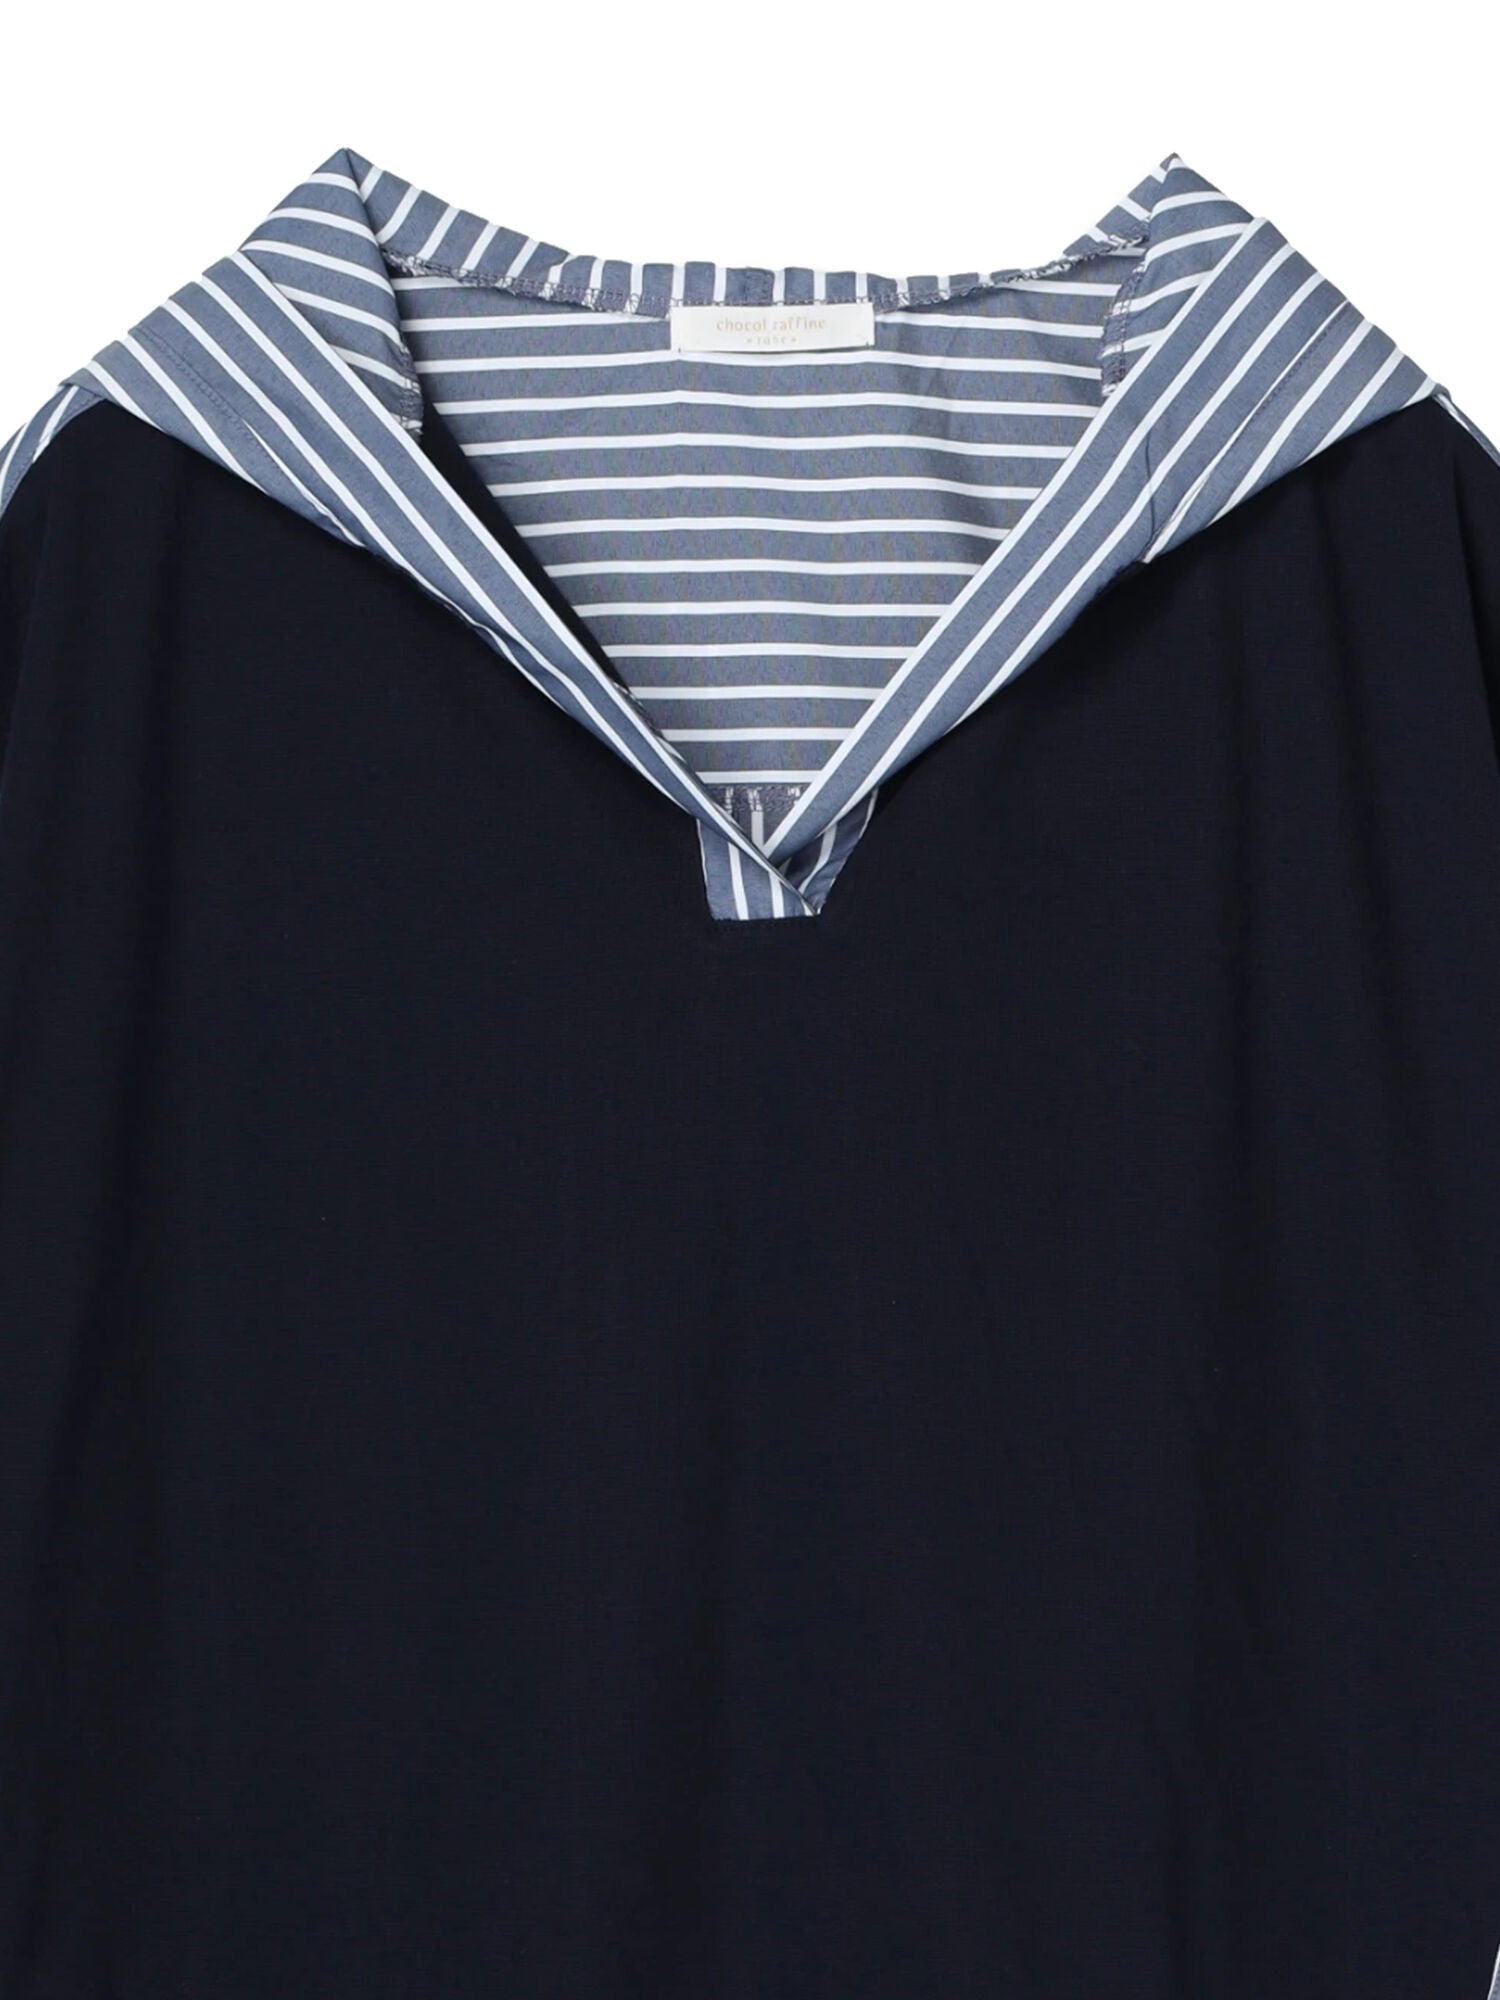 Ailee Hooded Striped Tunic